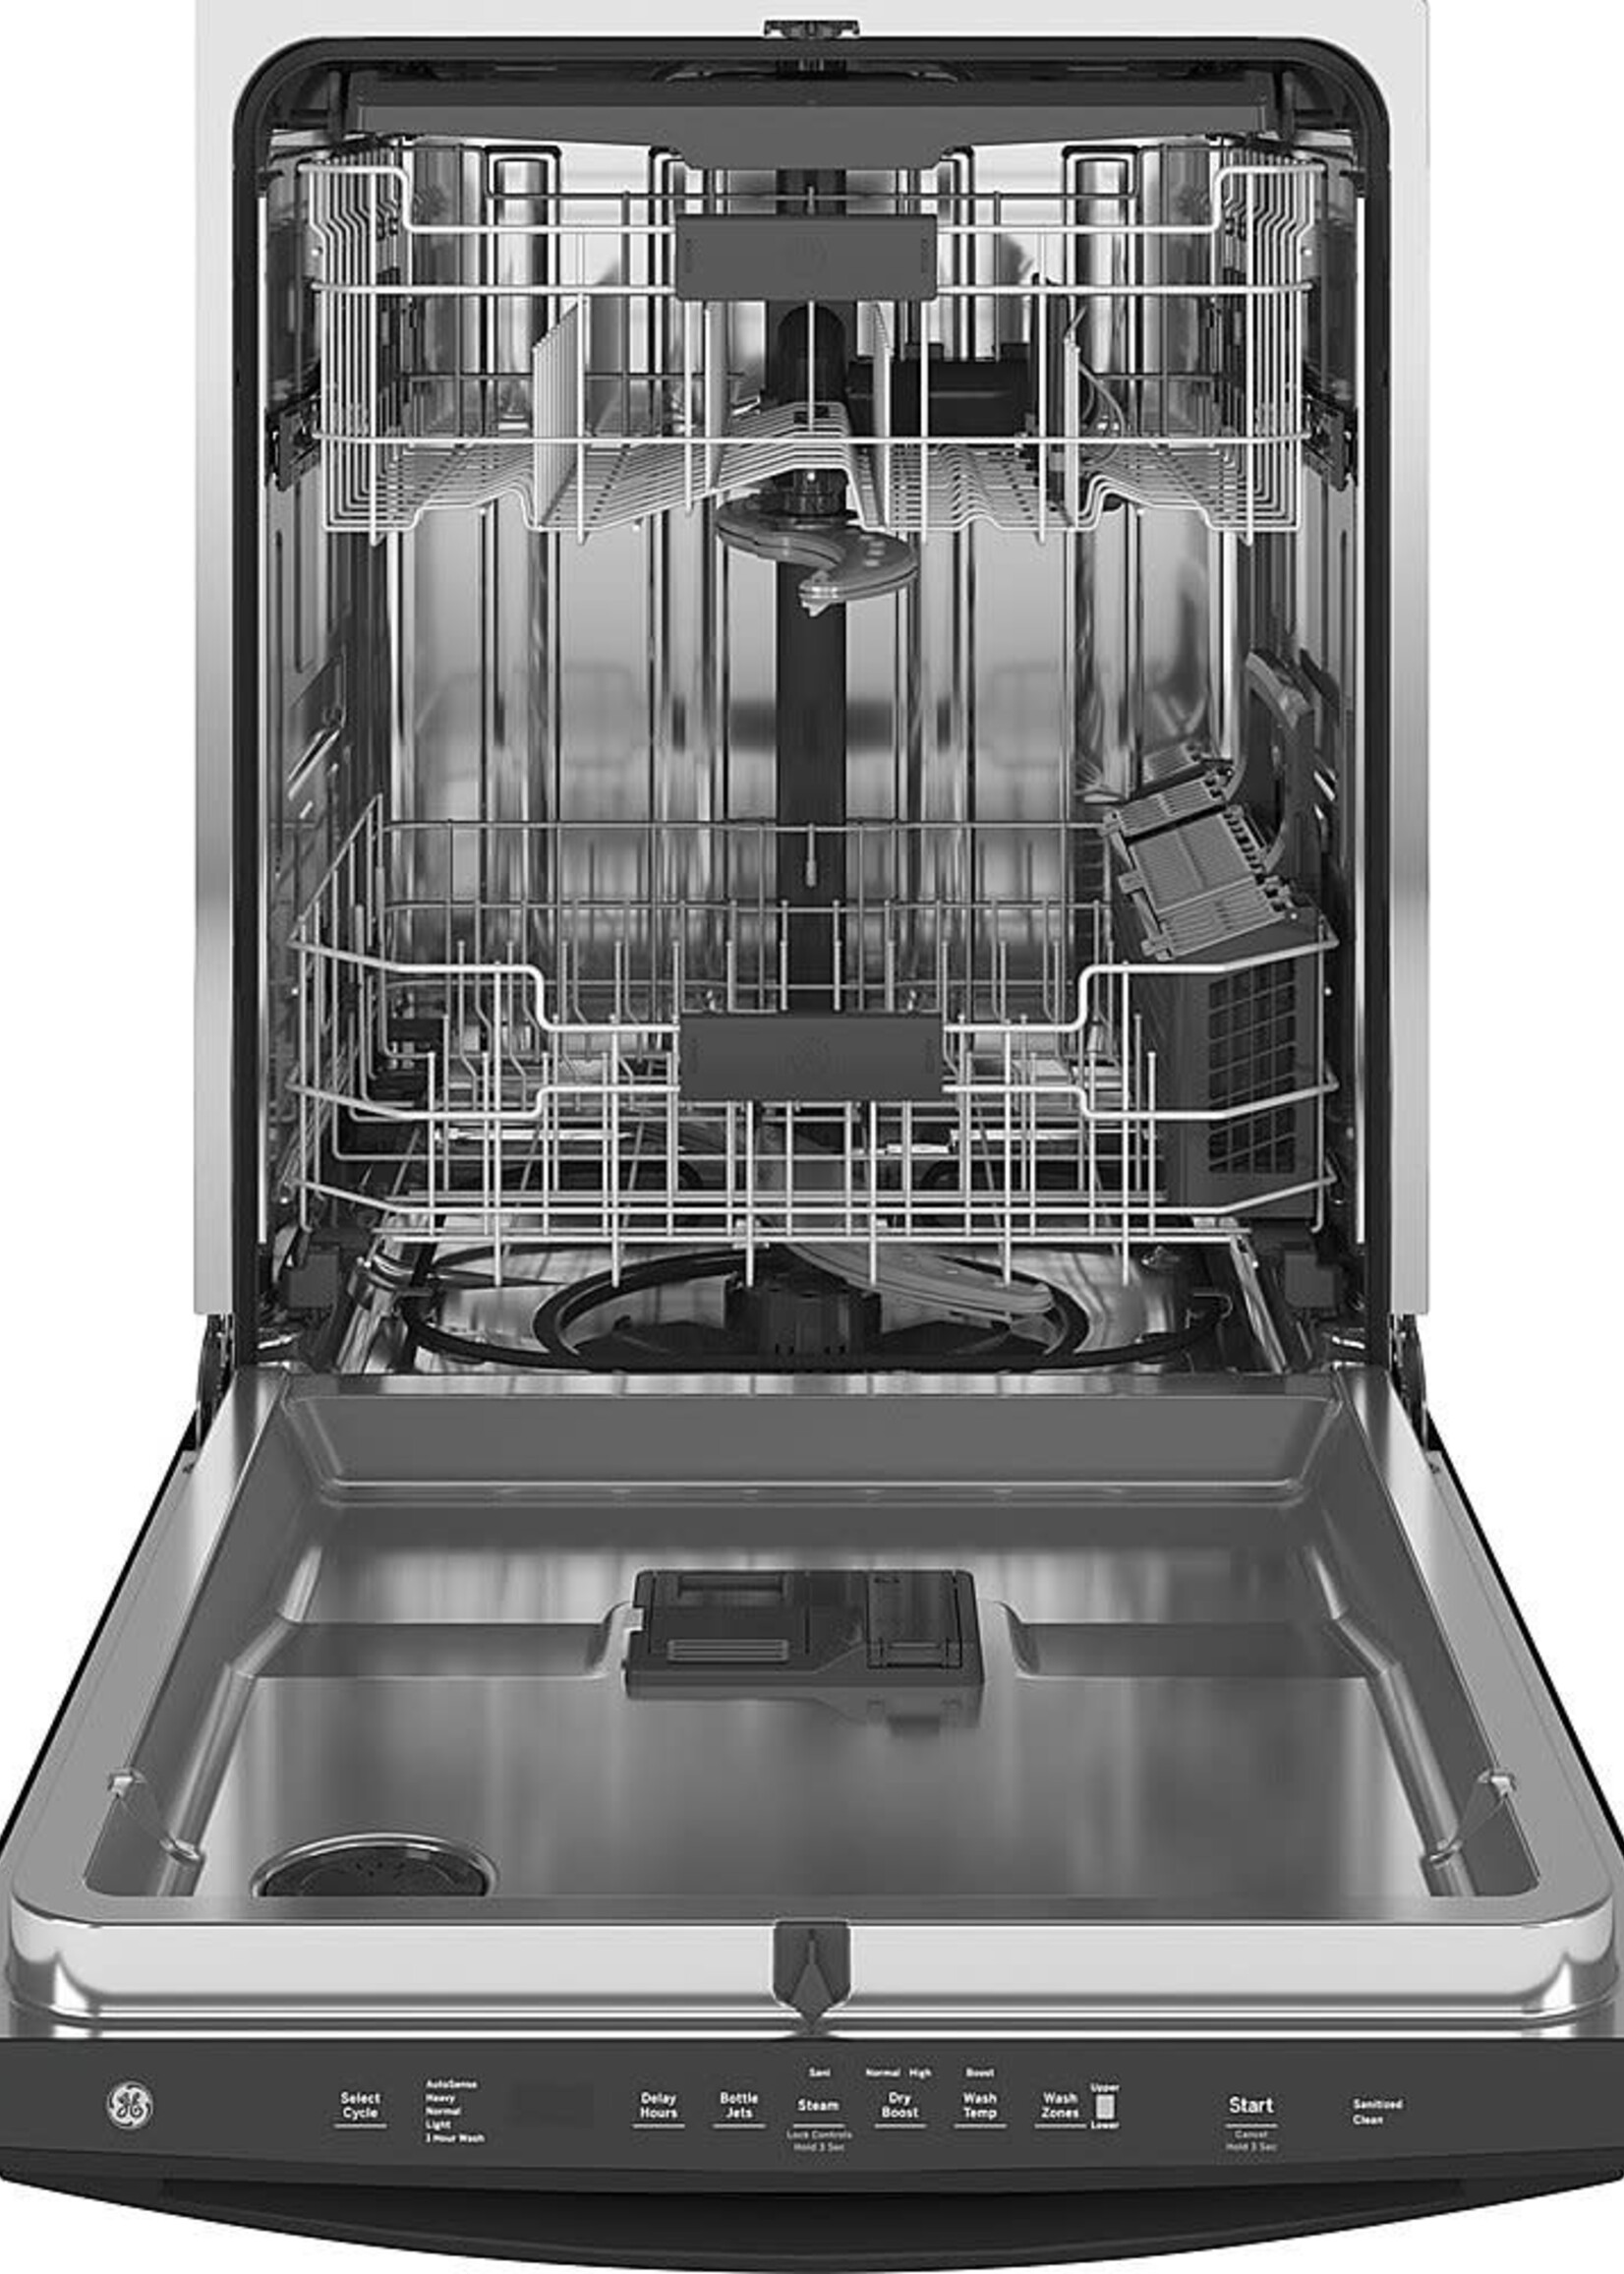 GE *GE GDT665SGNBB Dry Boost Top Control 24-in Built-In Dishwasher (Black) ENERGY STAR, 46-dBA